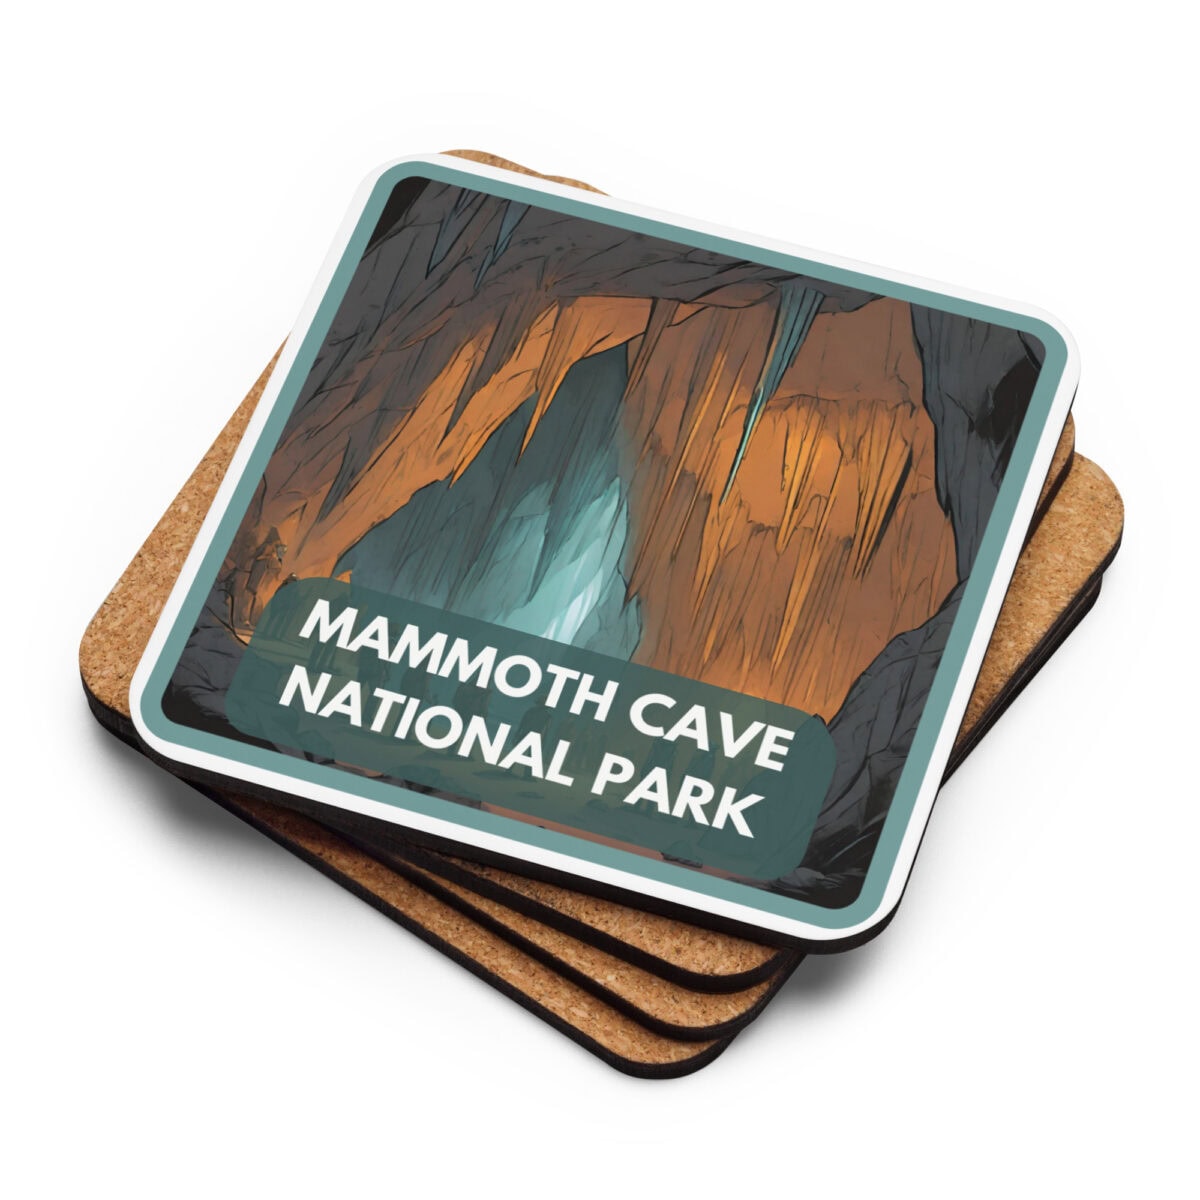 Mammoth Cave National Park Coaster - The National Parks Experience